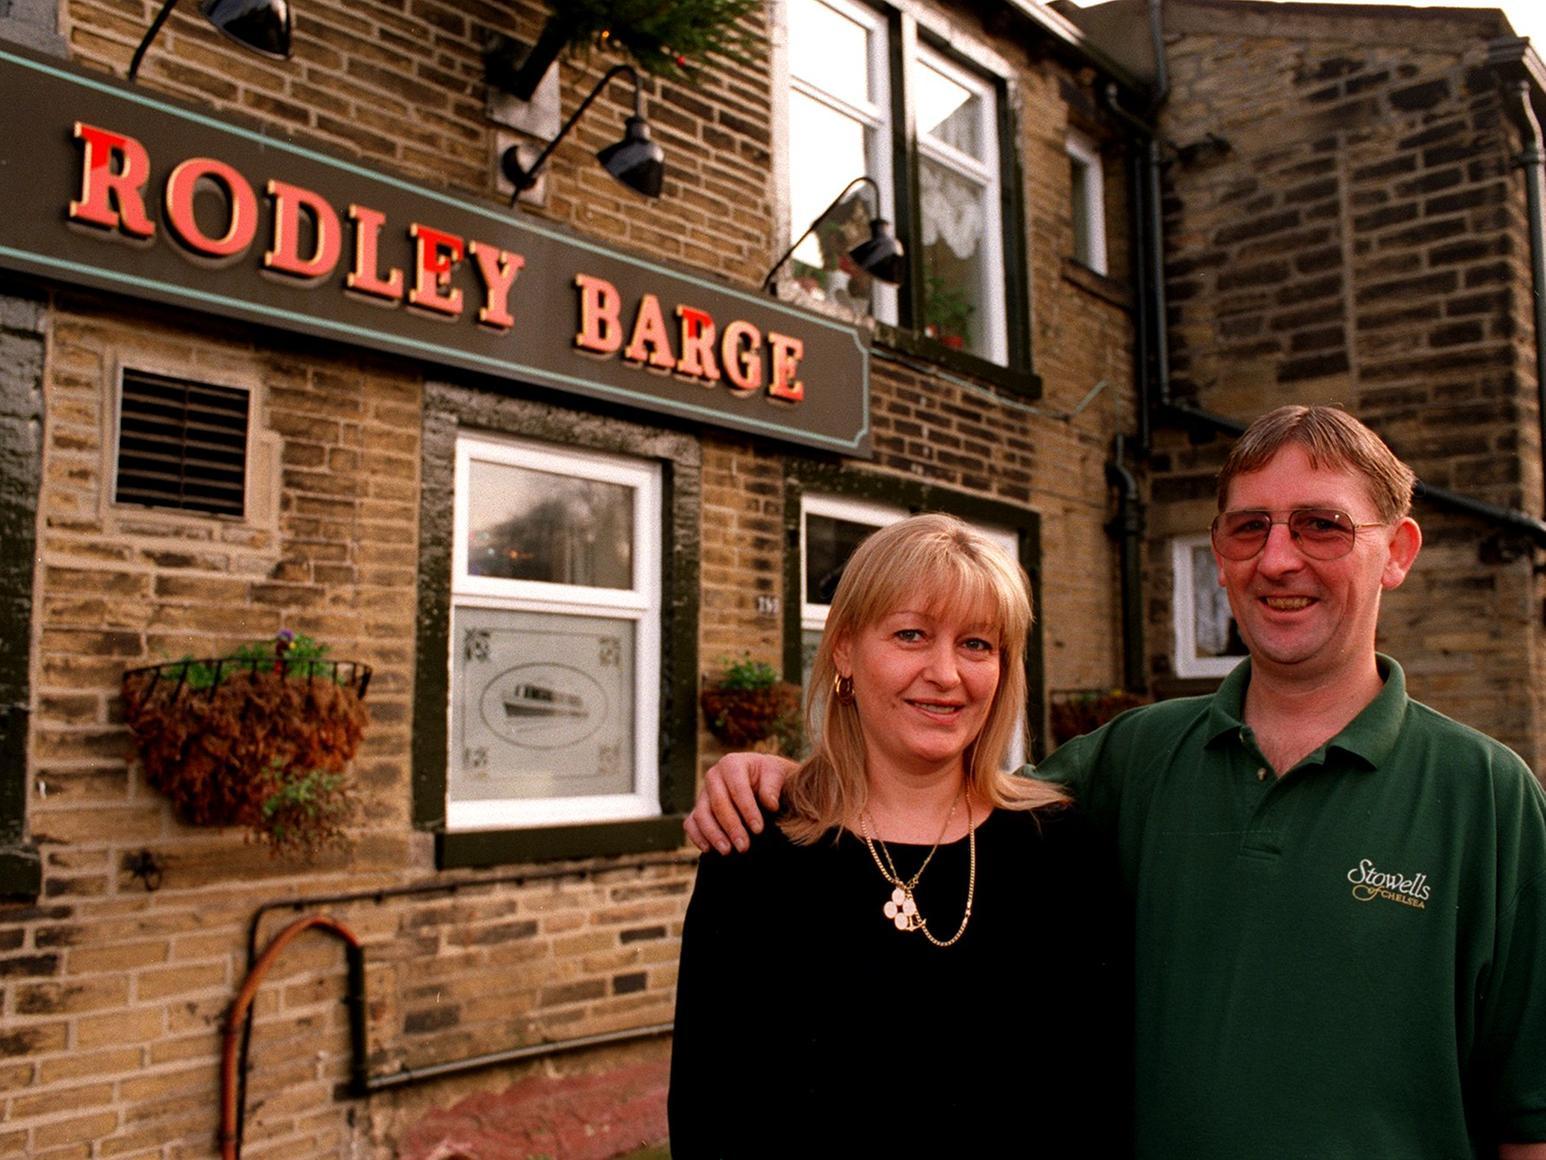 Do you remember Stuart and Deborah Whittaker behind the bar at The Rodley Barge pub?